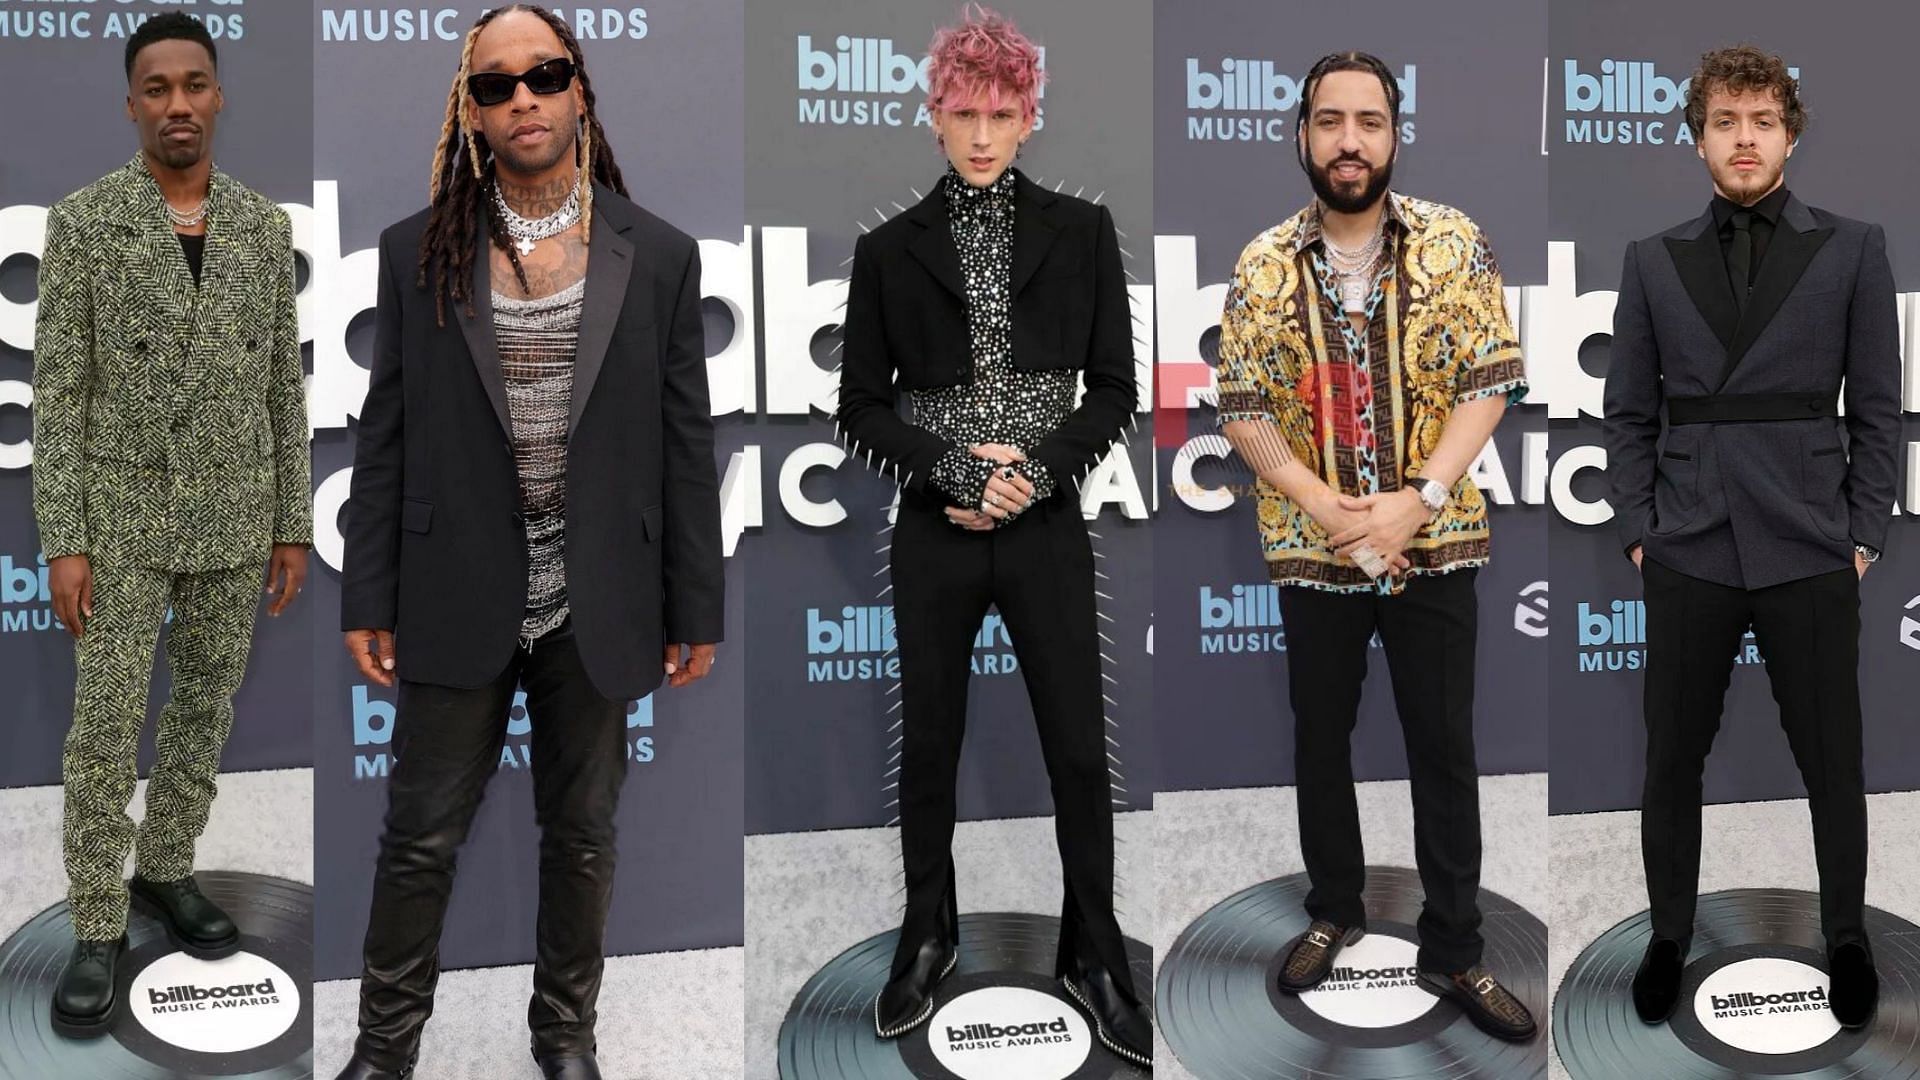 Billboard Music Awards 2022 red carpet: 5 best-dressed men and what they wore